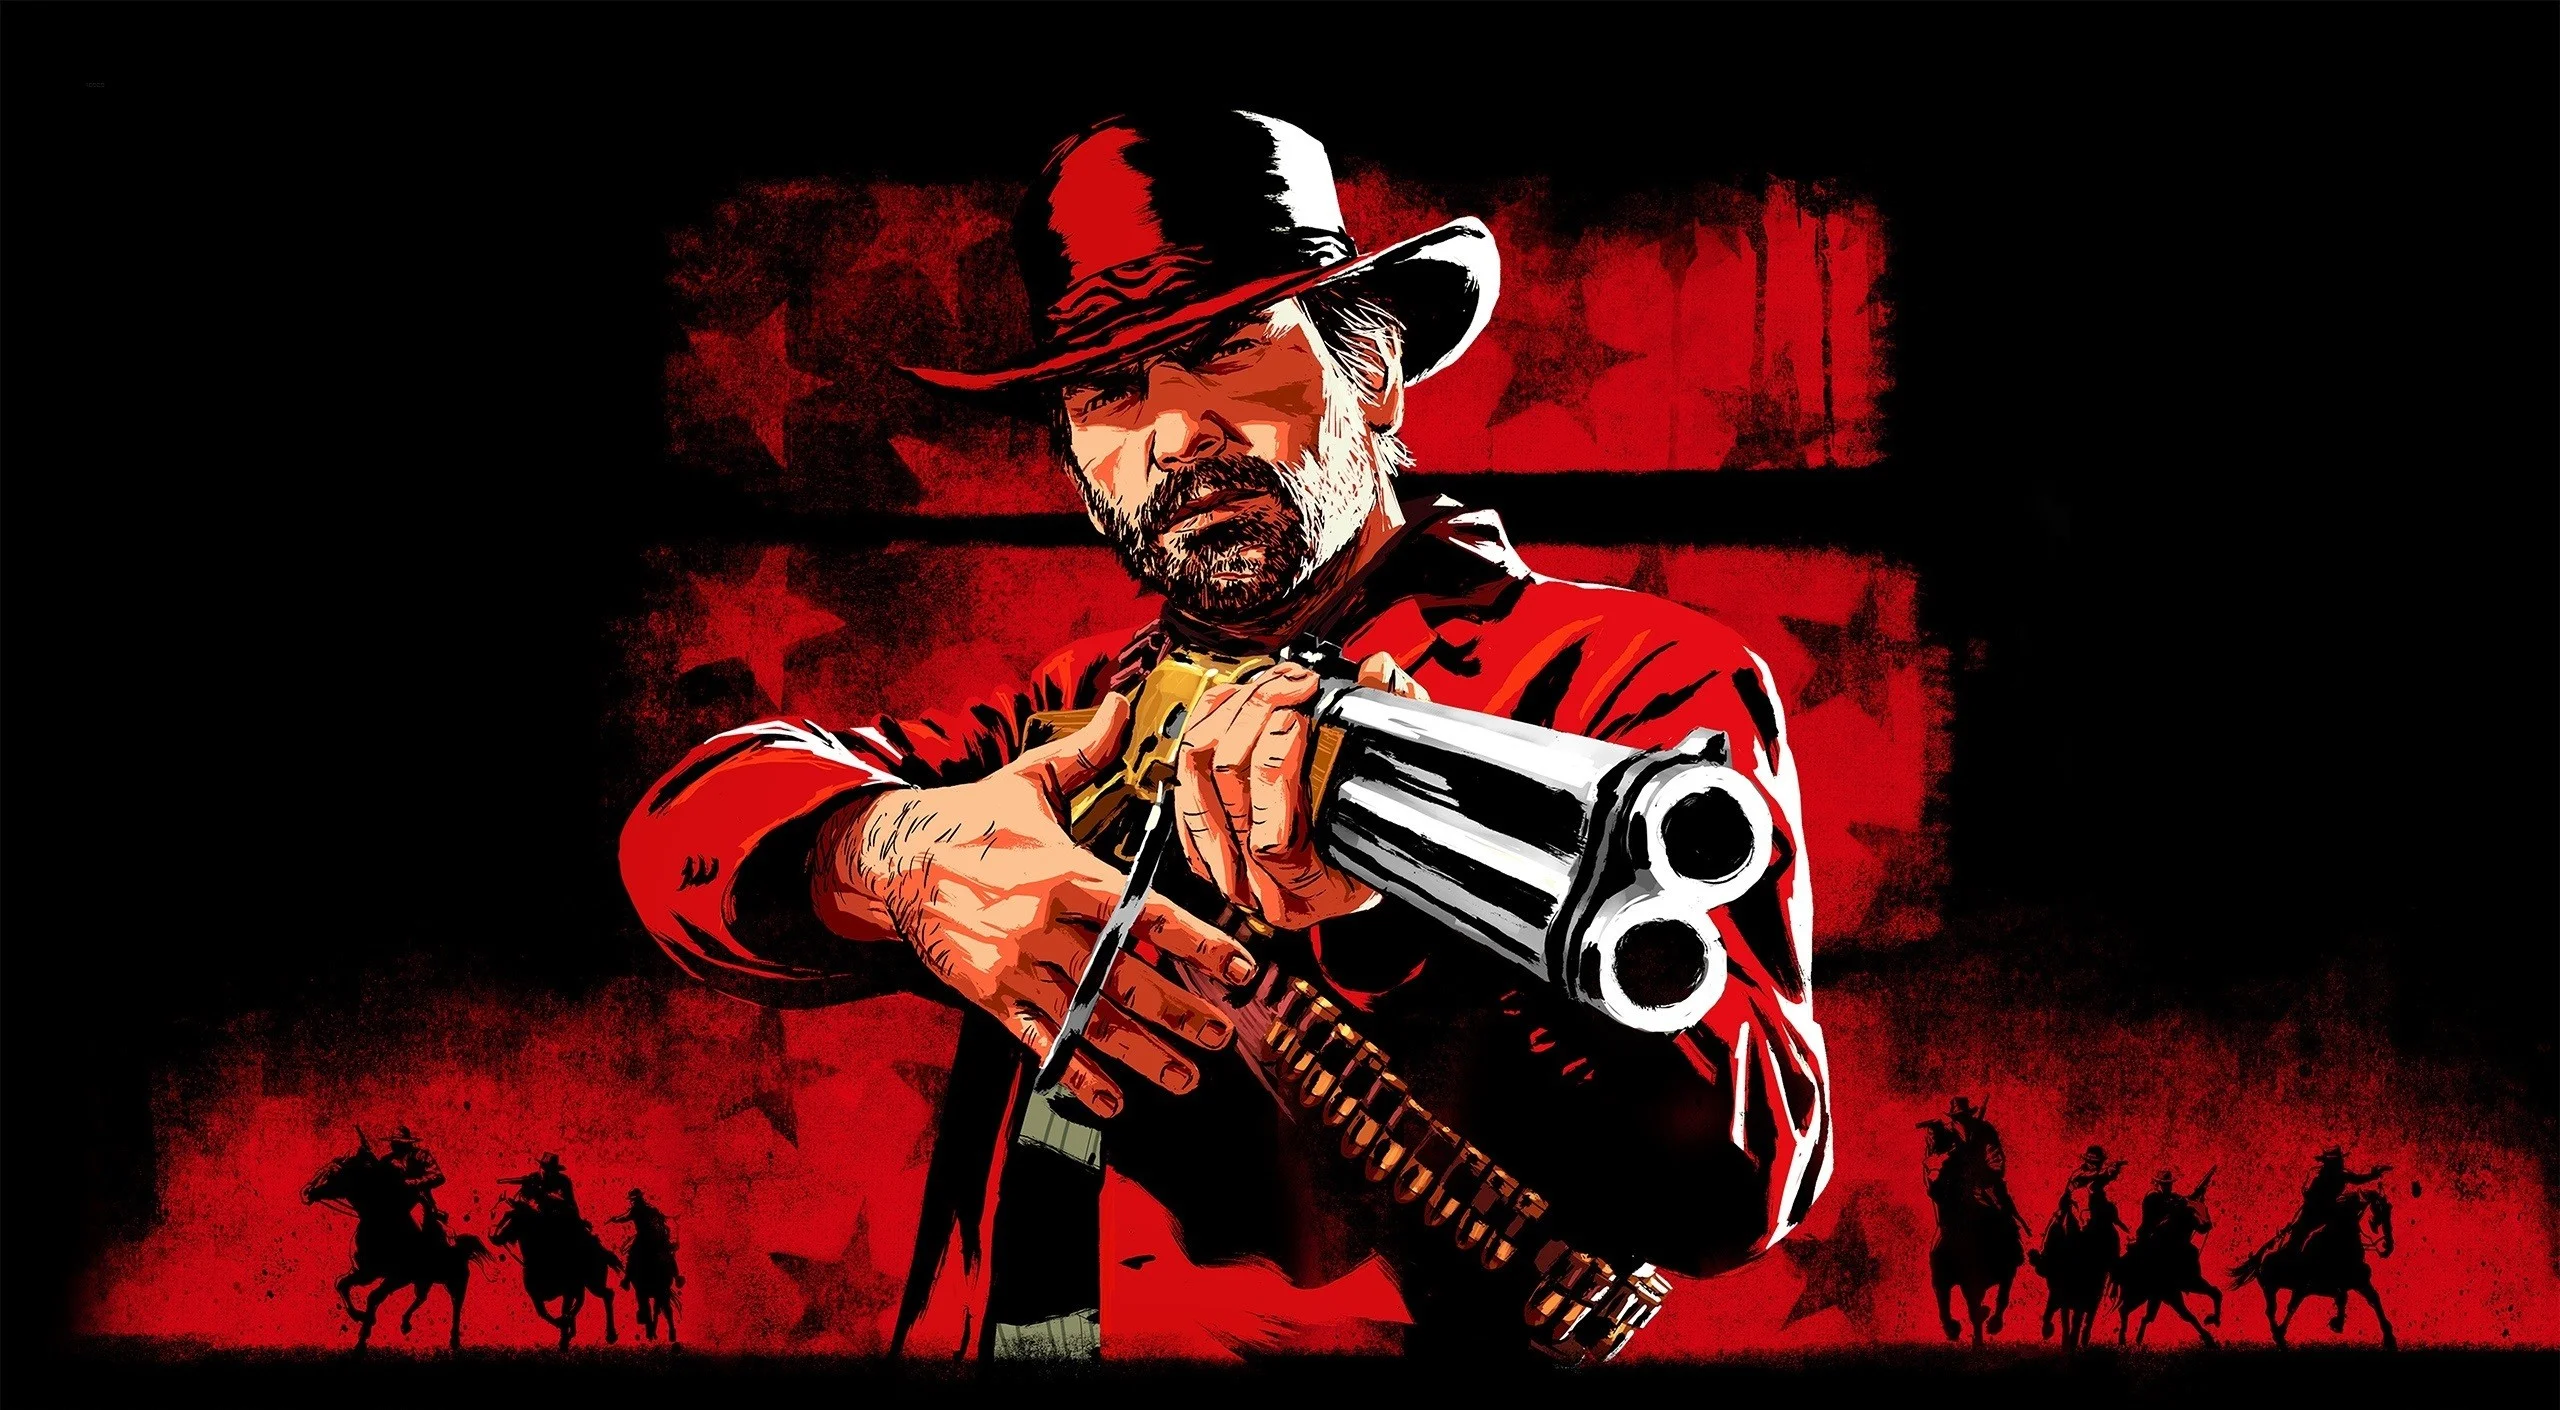 Some new Red Dead Redemption lit up on the official website of Rockstar Games